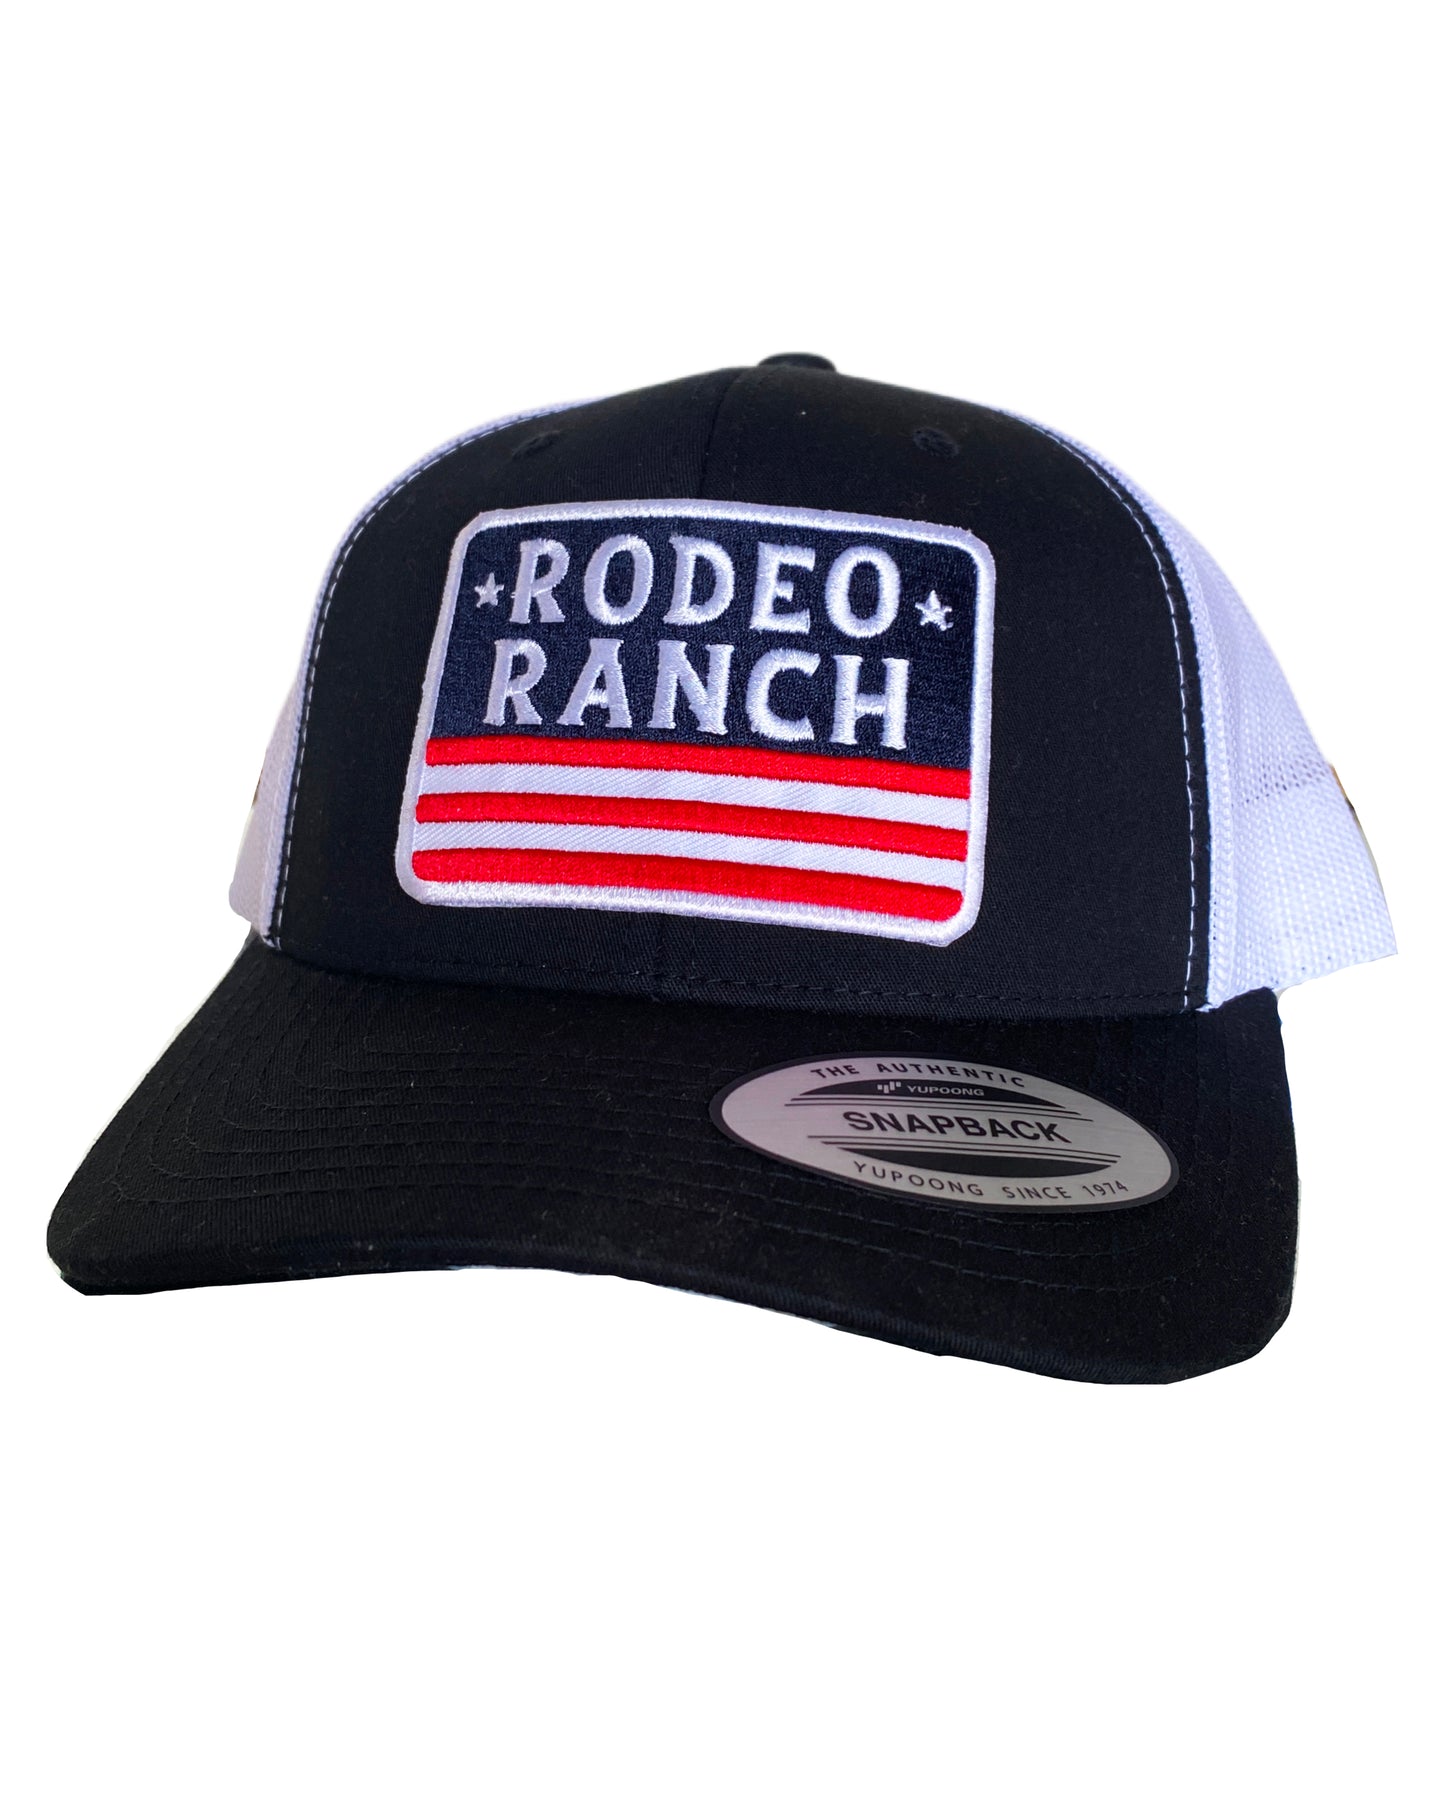 Rodeo Ranch Flag Hat - Black and White